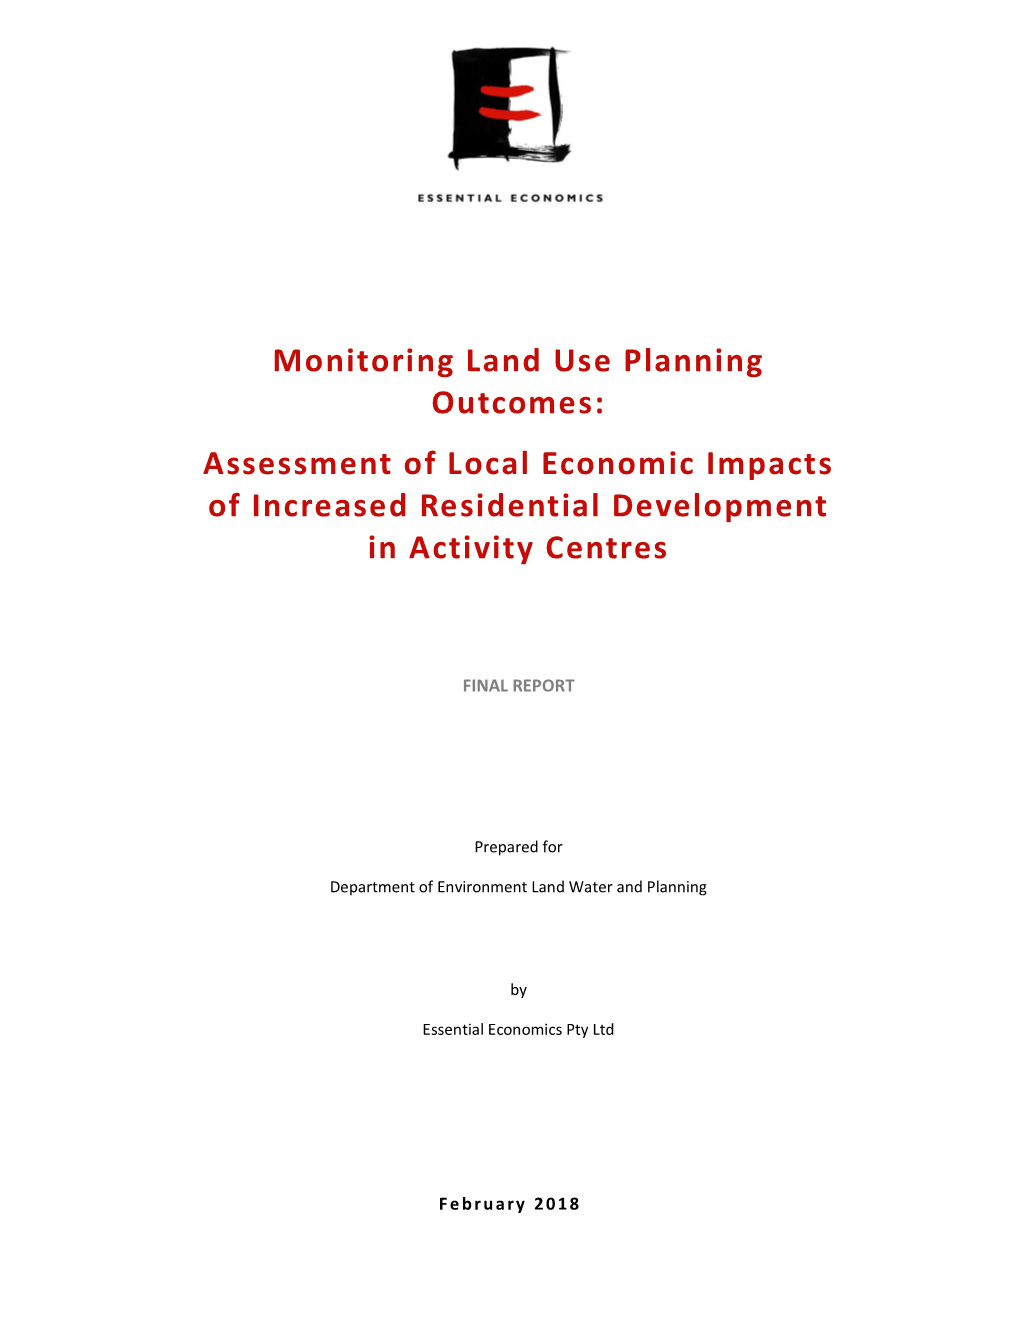 Monitoring Land Use Planning Outcomes: Assessment of Local Economic Impacts of Increased Residential Development in Activity Centres